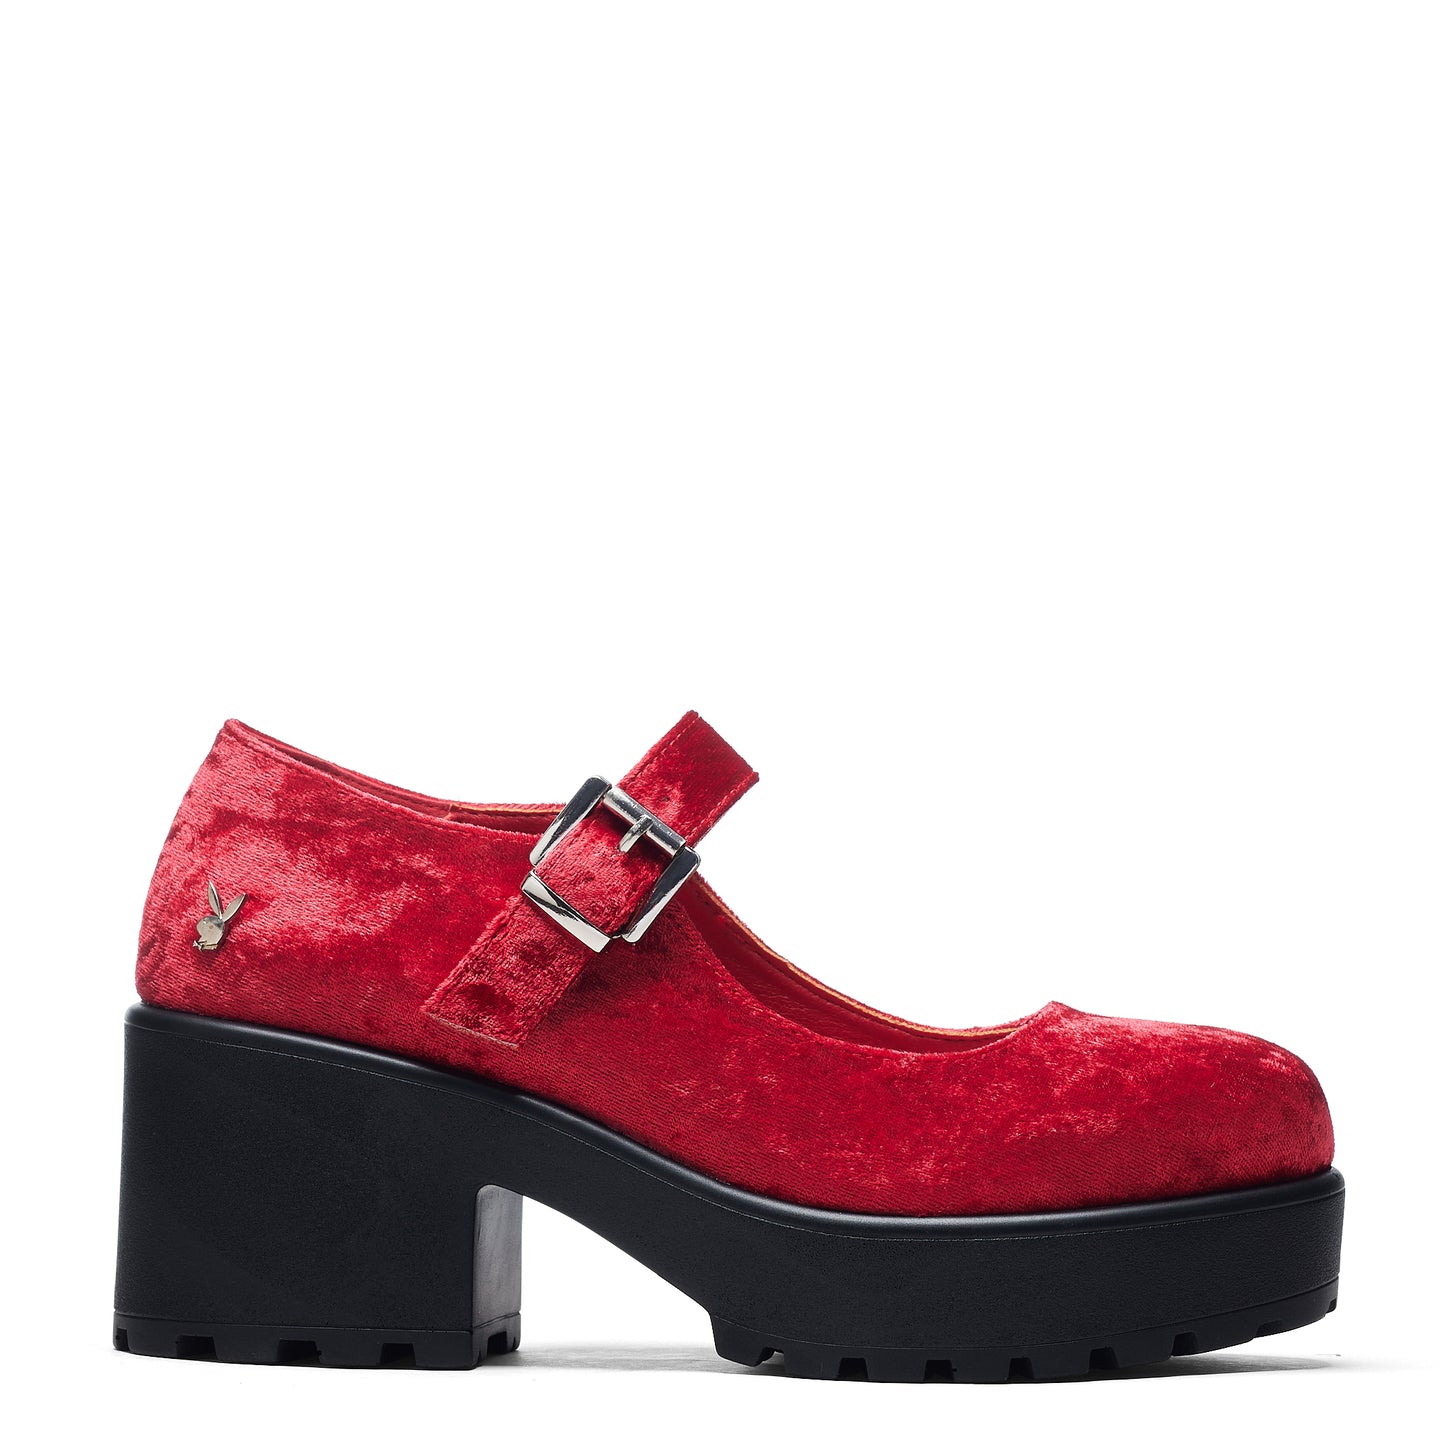 Tira Playboy Mary Janes 'Fiery Vigilante Edition' - Mary Janes - KOI Footwear - Red - Side View